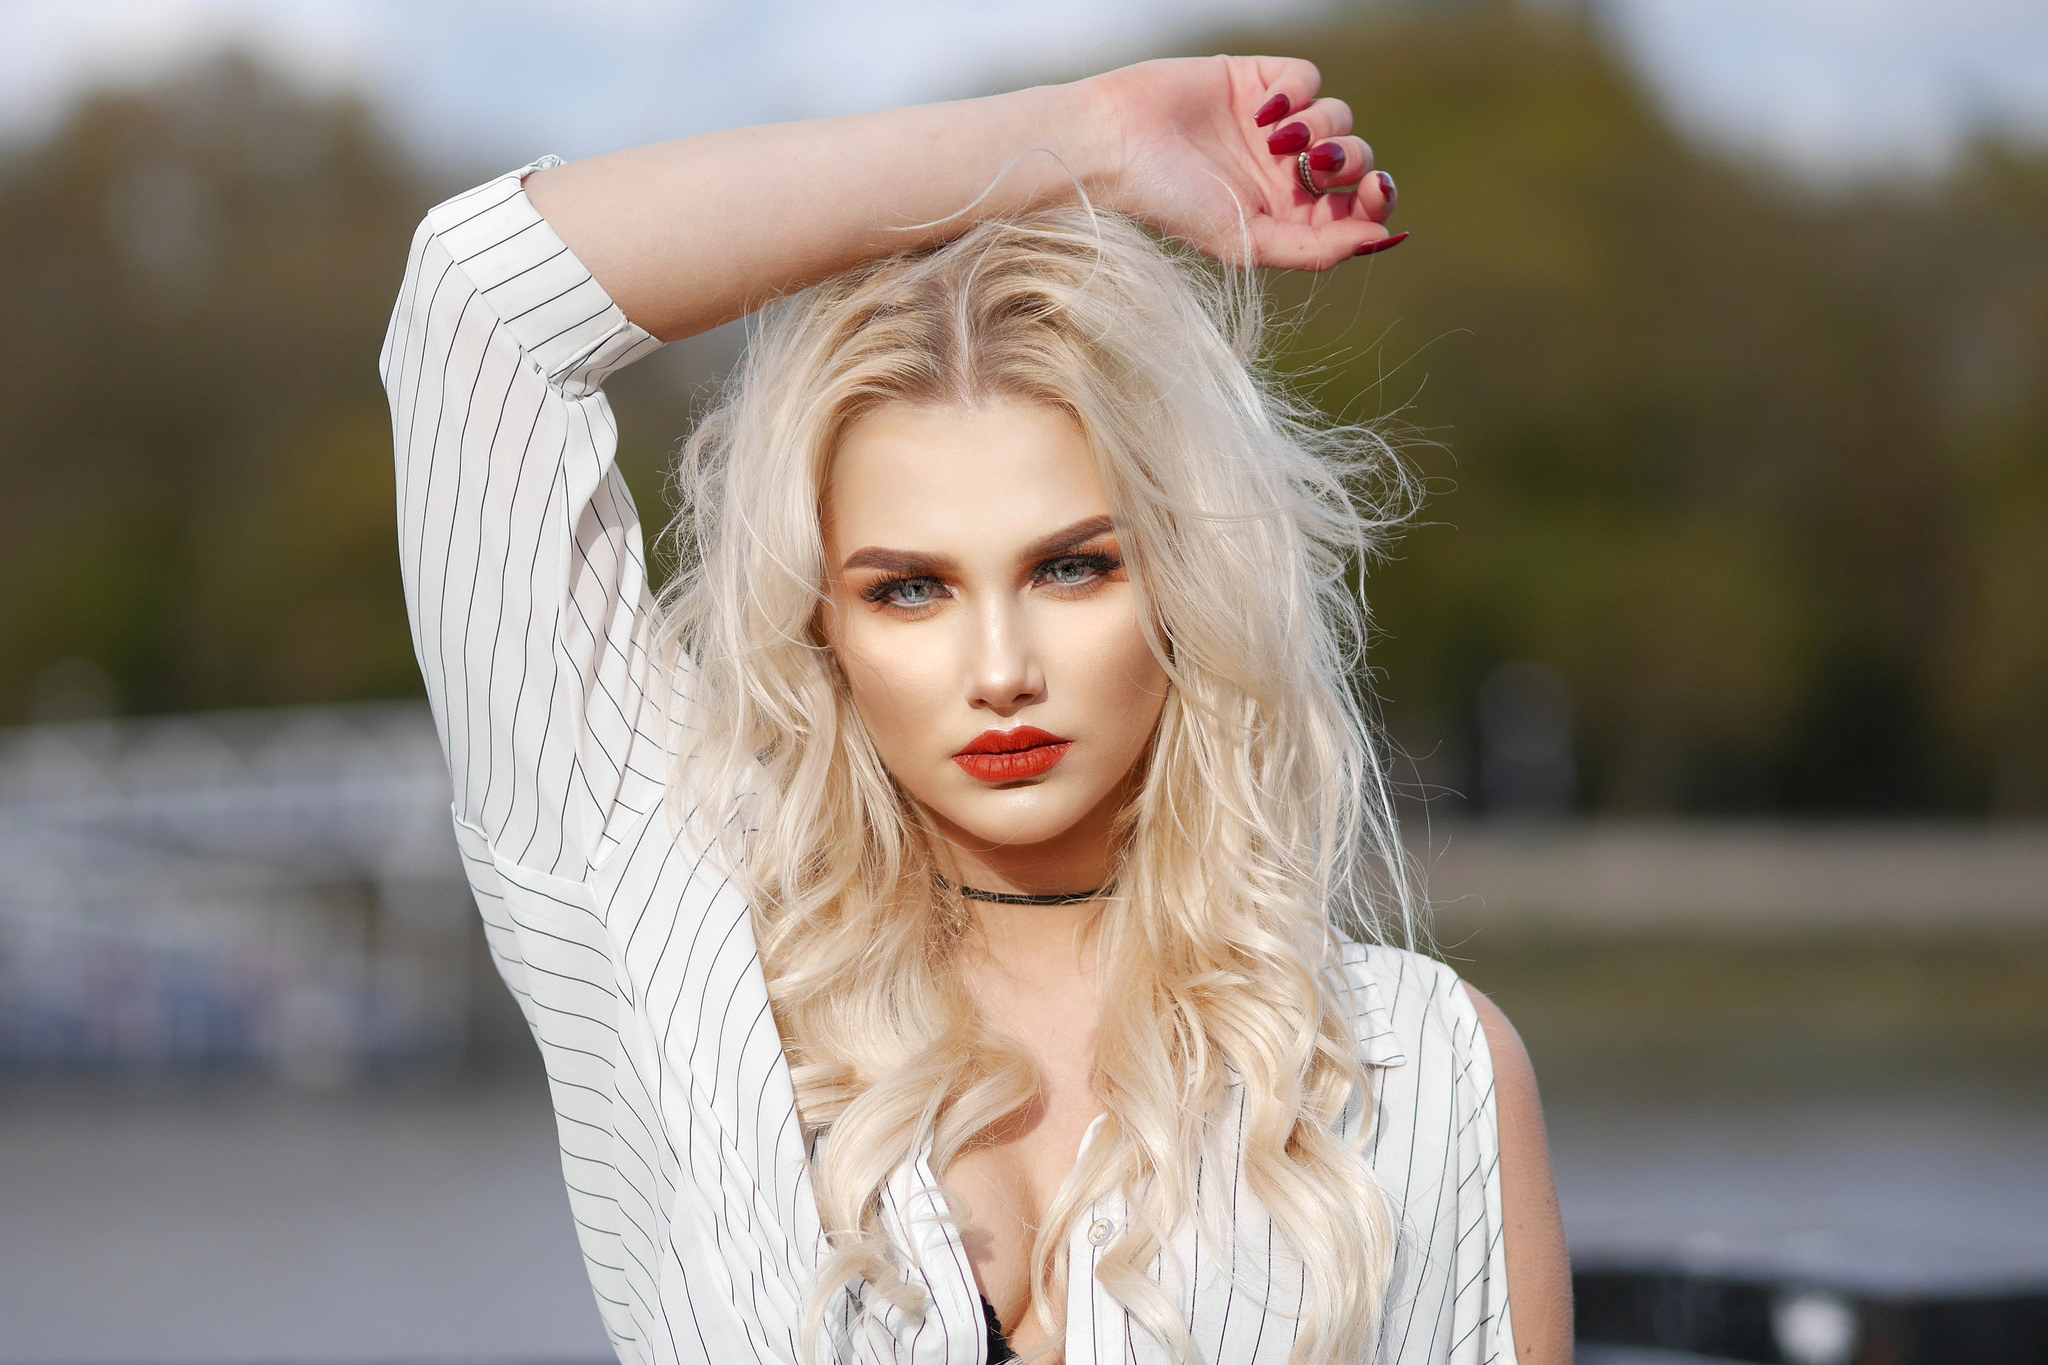 People 2048x1365 women face portrait red lipstick depth of field red nails women outdoors blonde white shirt platinum blonde hand(s) on head